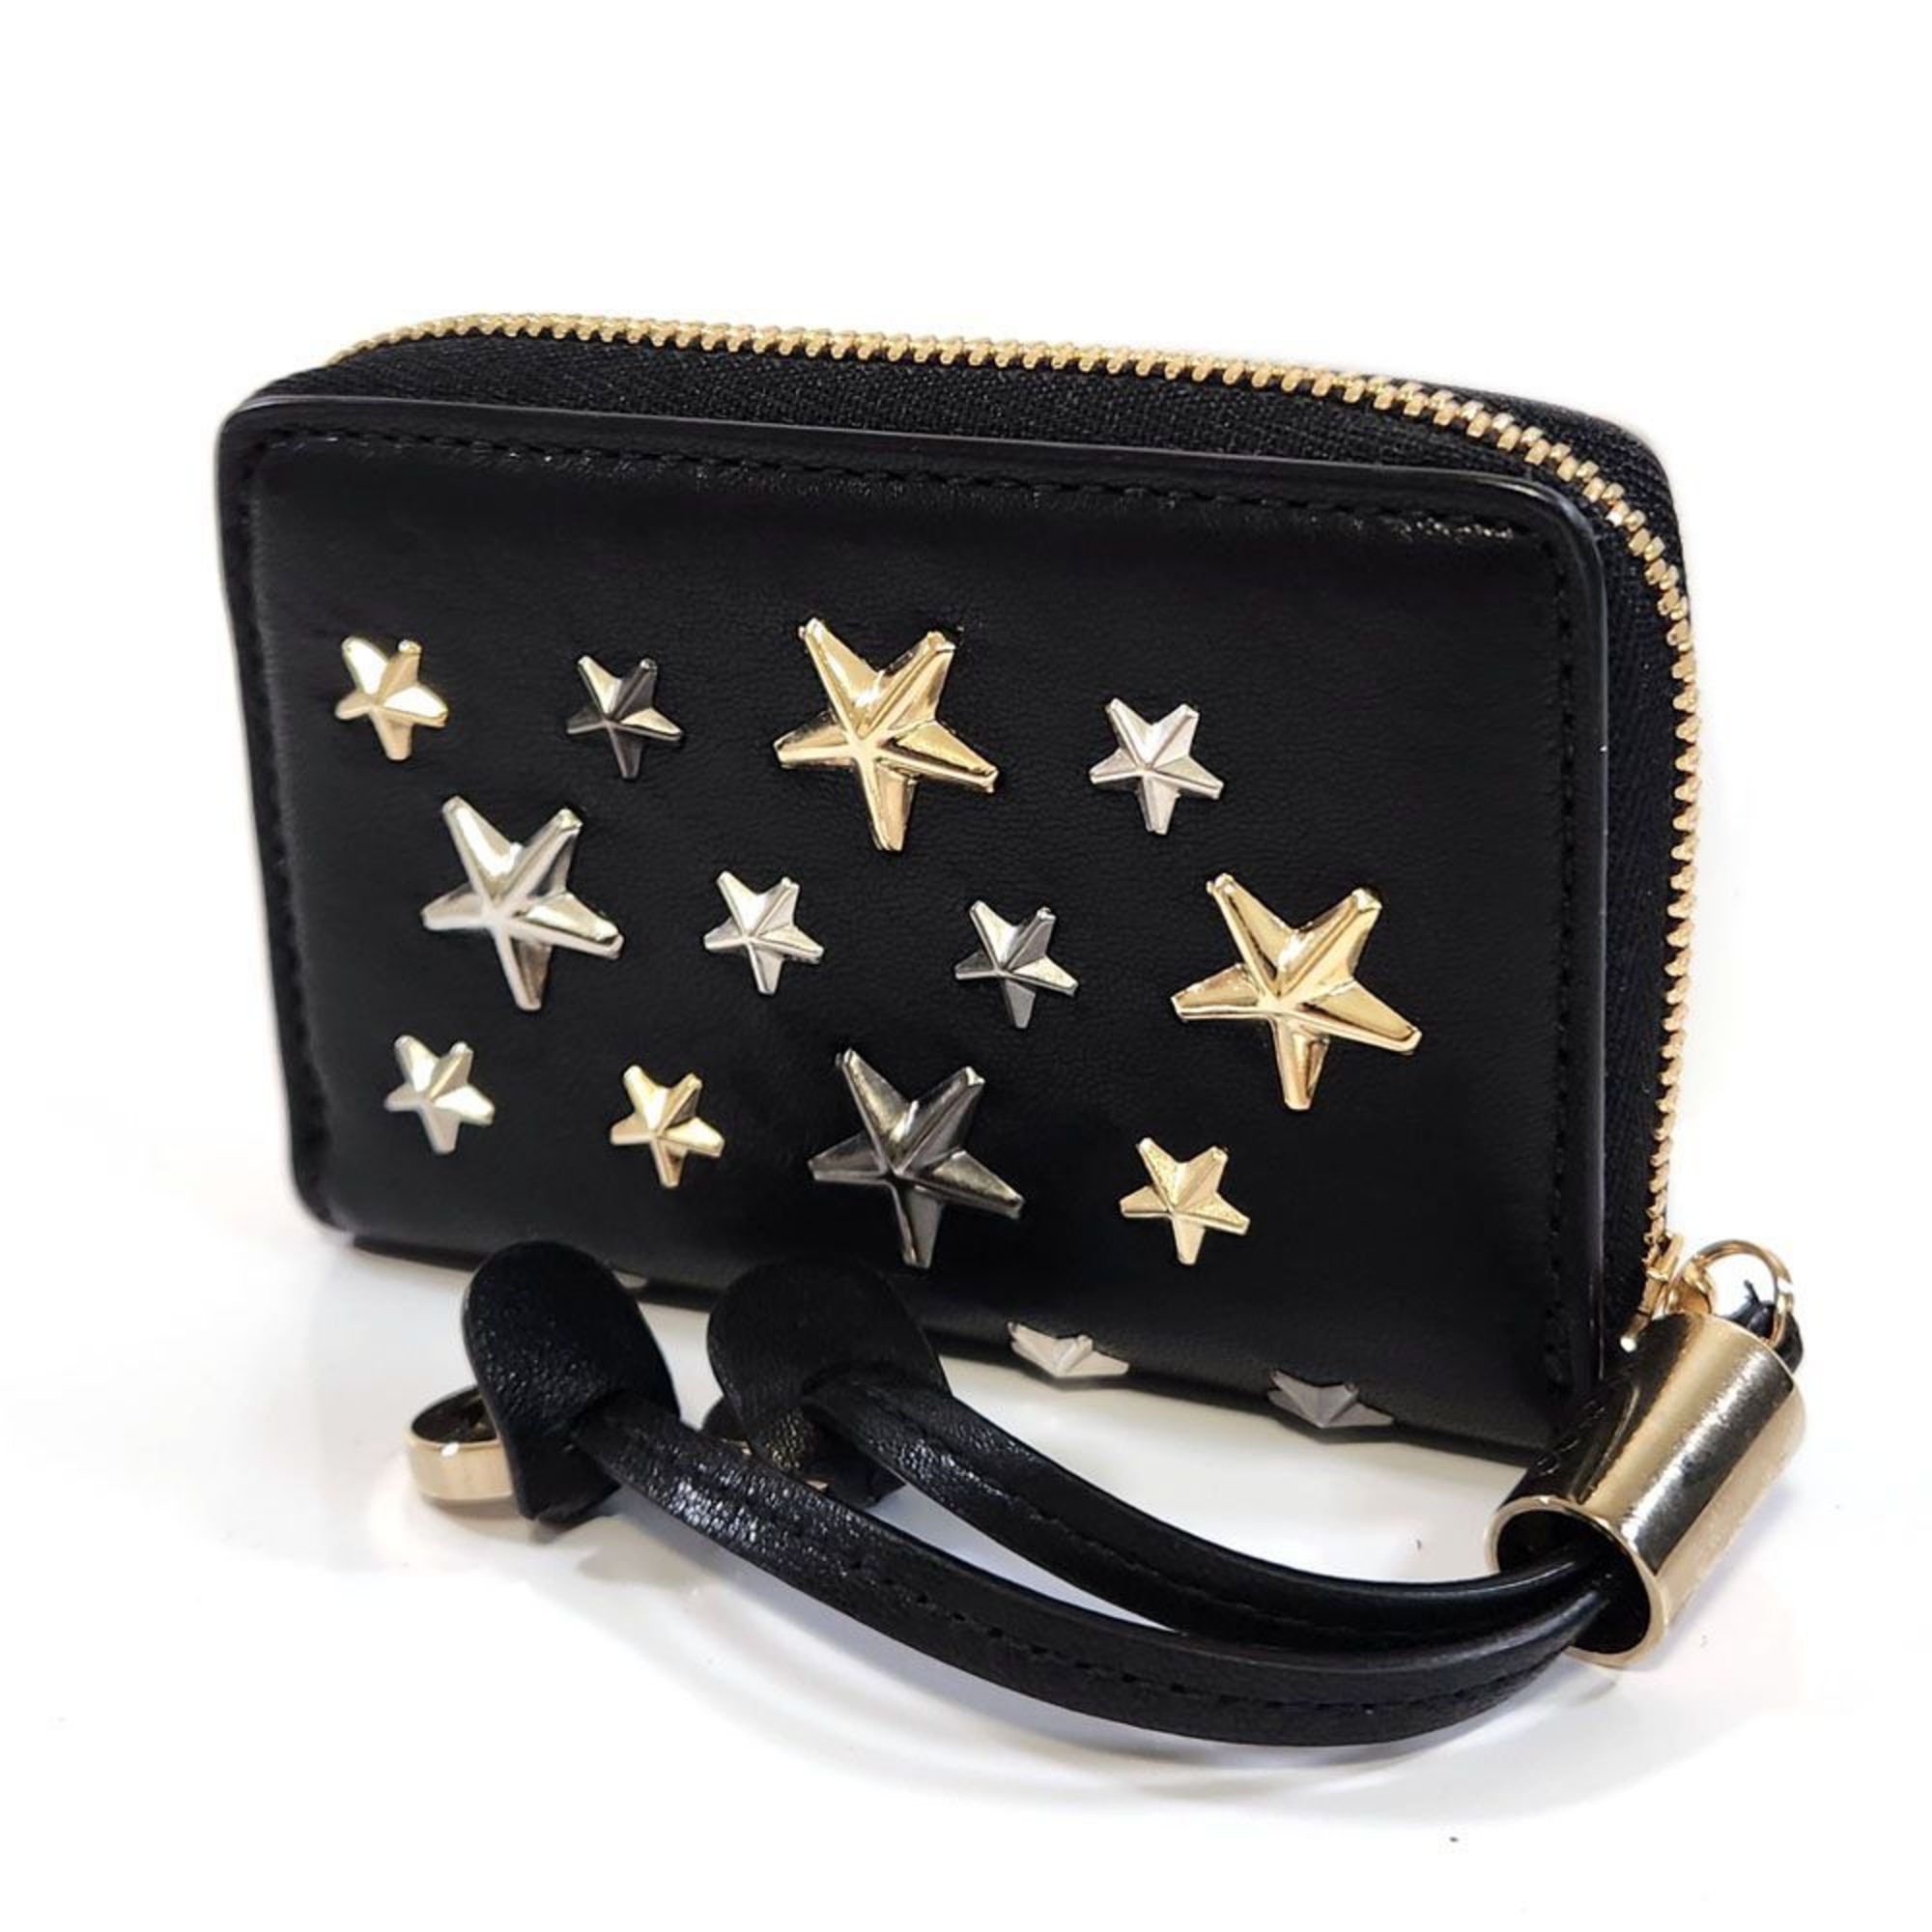 JIMMY CHOO Star Studs Wallet/Coin Case NELLIE Coin Purse Women's Black Leather